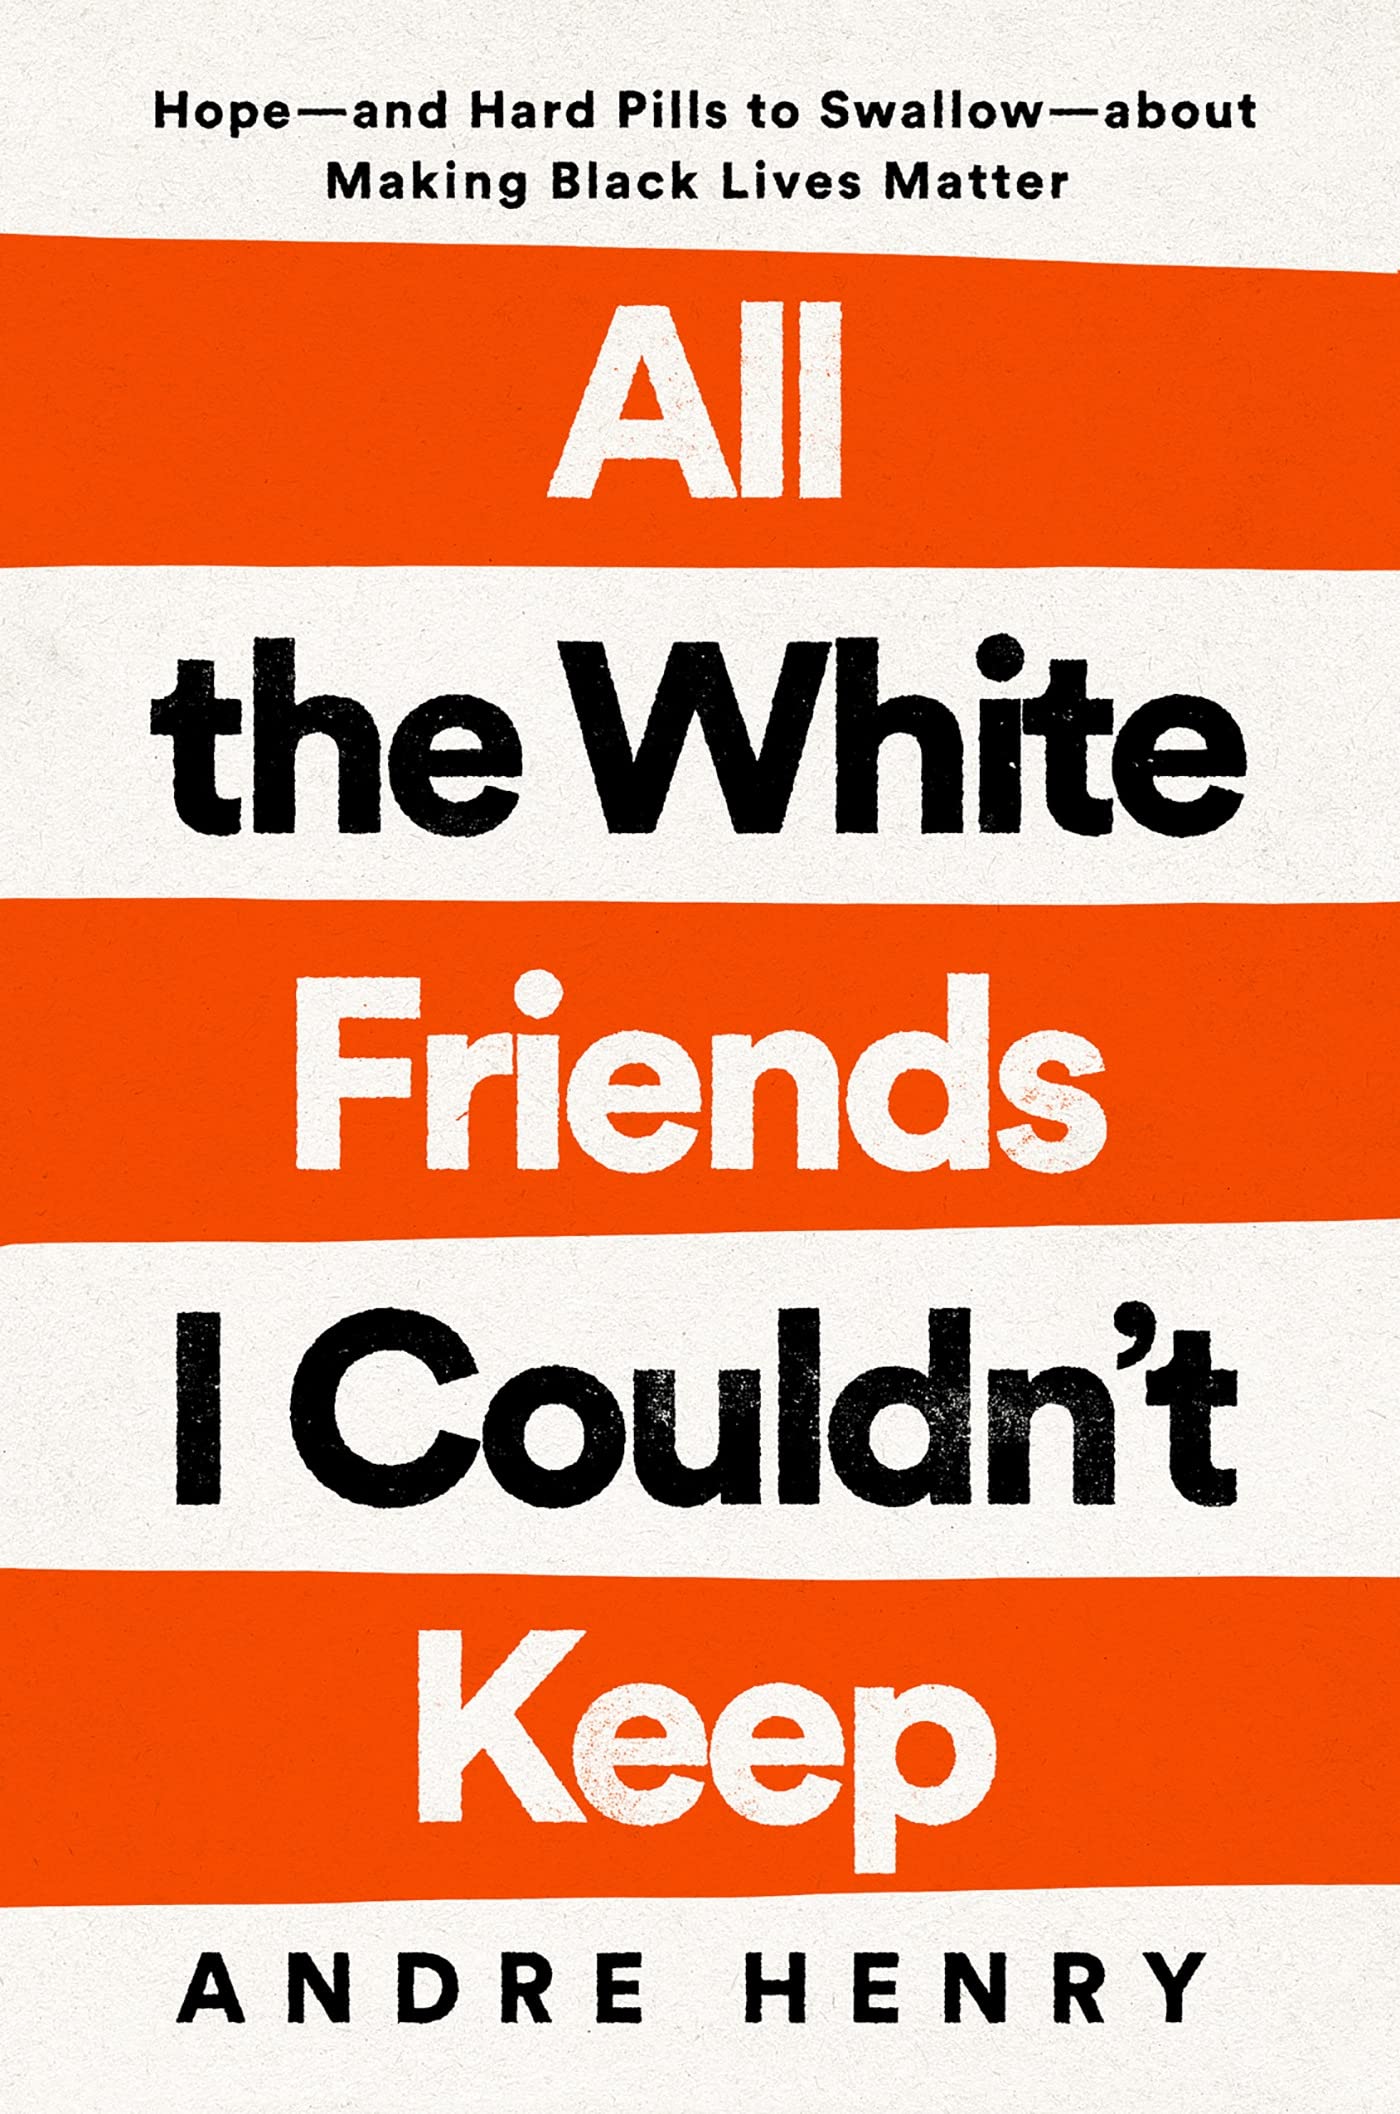 All the White Friends I Couldn't Keep // Hope--and Hard Pills to Swallow--About Fighting for Black Lives